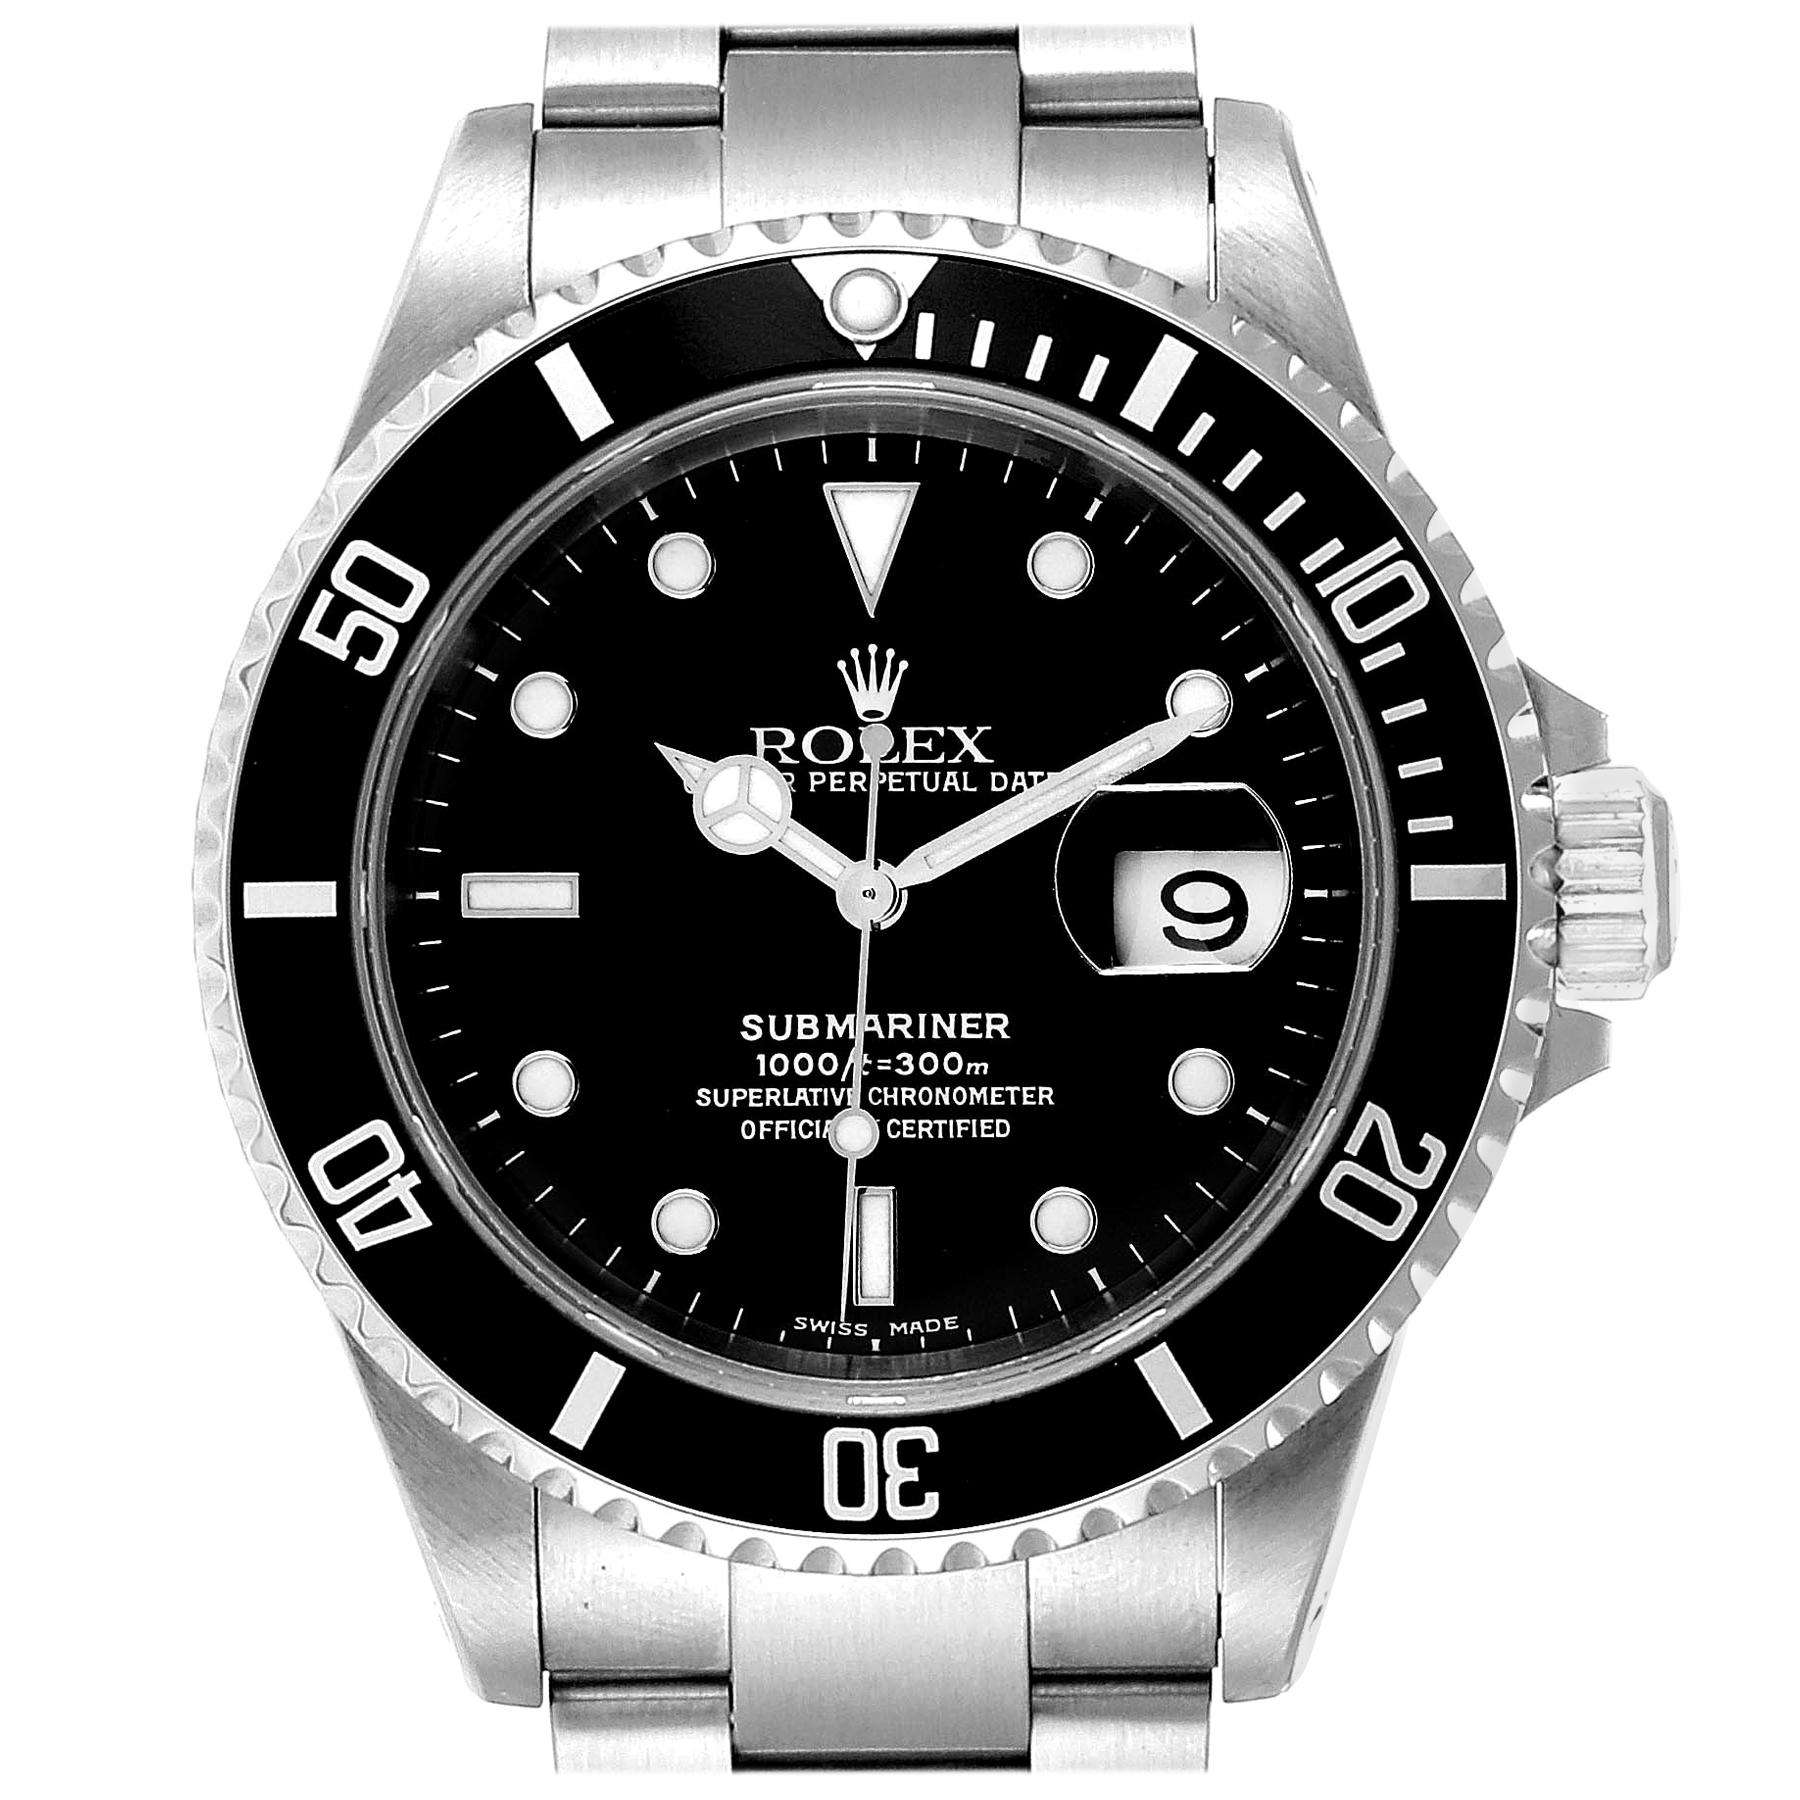 Rolex Submariner Date Stainless Steel Men’s Watch 16610 For Sale